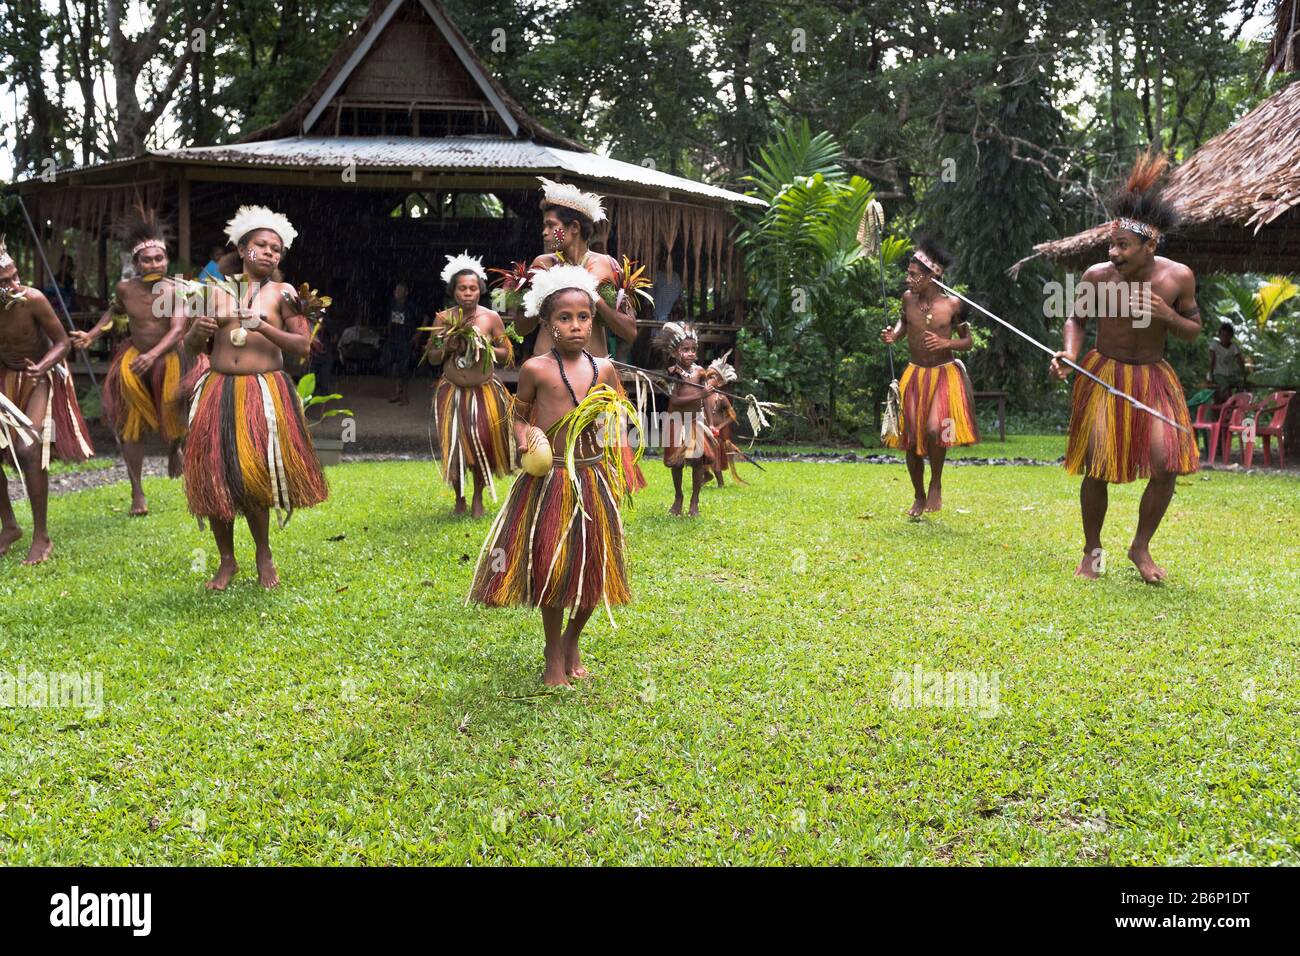 dh Traditional PNG native dances ALOTAU PAPUA NEW GUINEA Welcoming visitors to village children dancing culture family tribal dress tribes women tribe Stock Photo